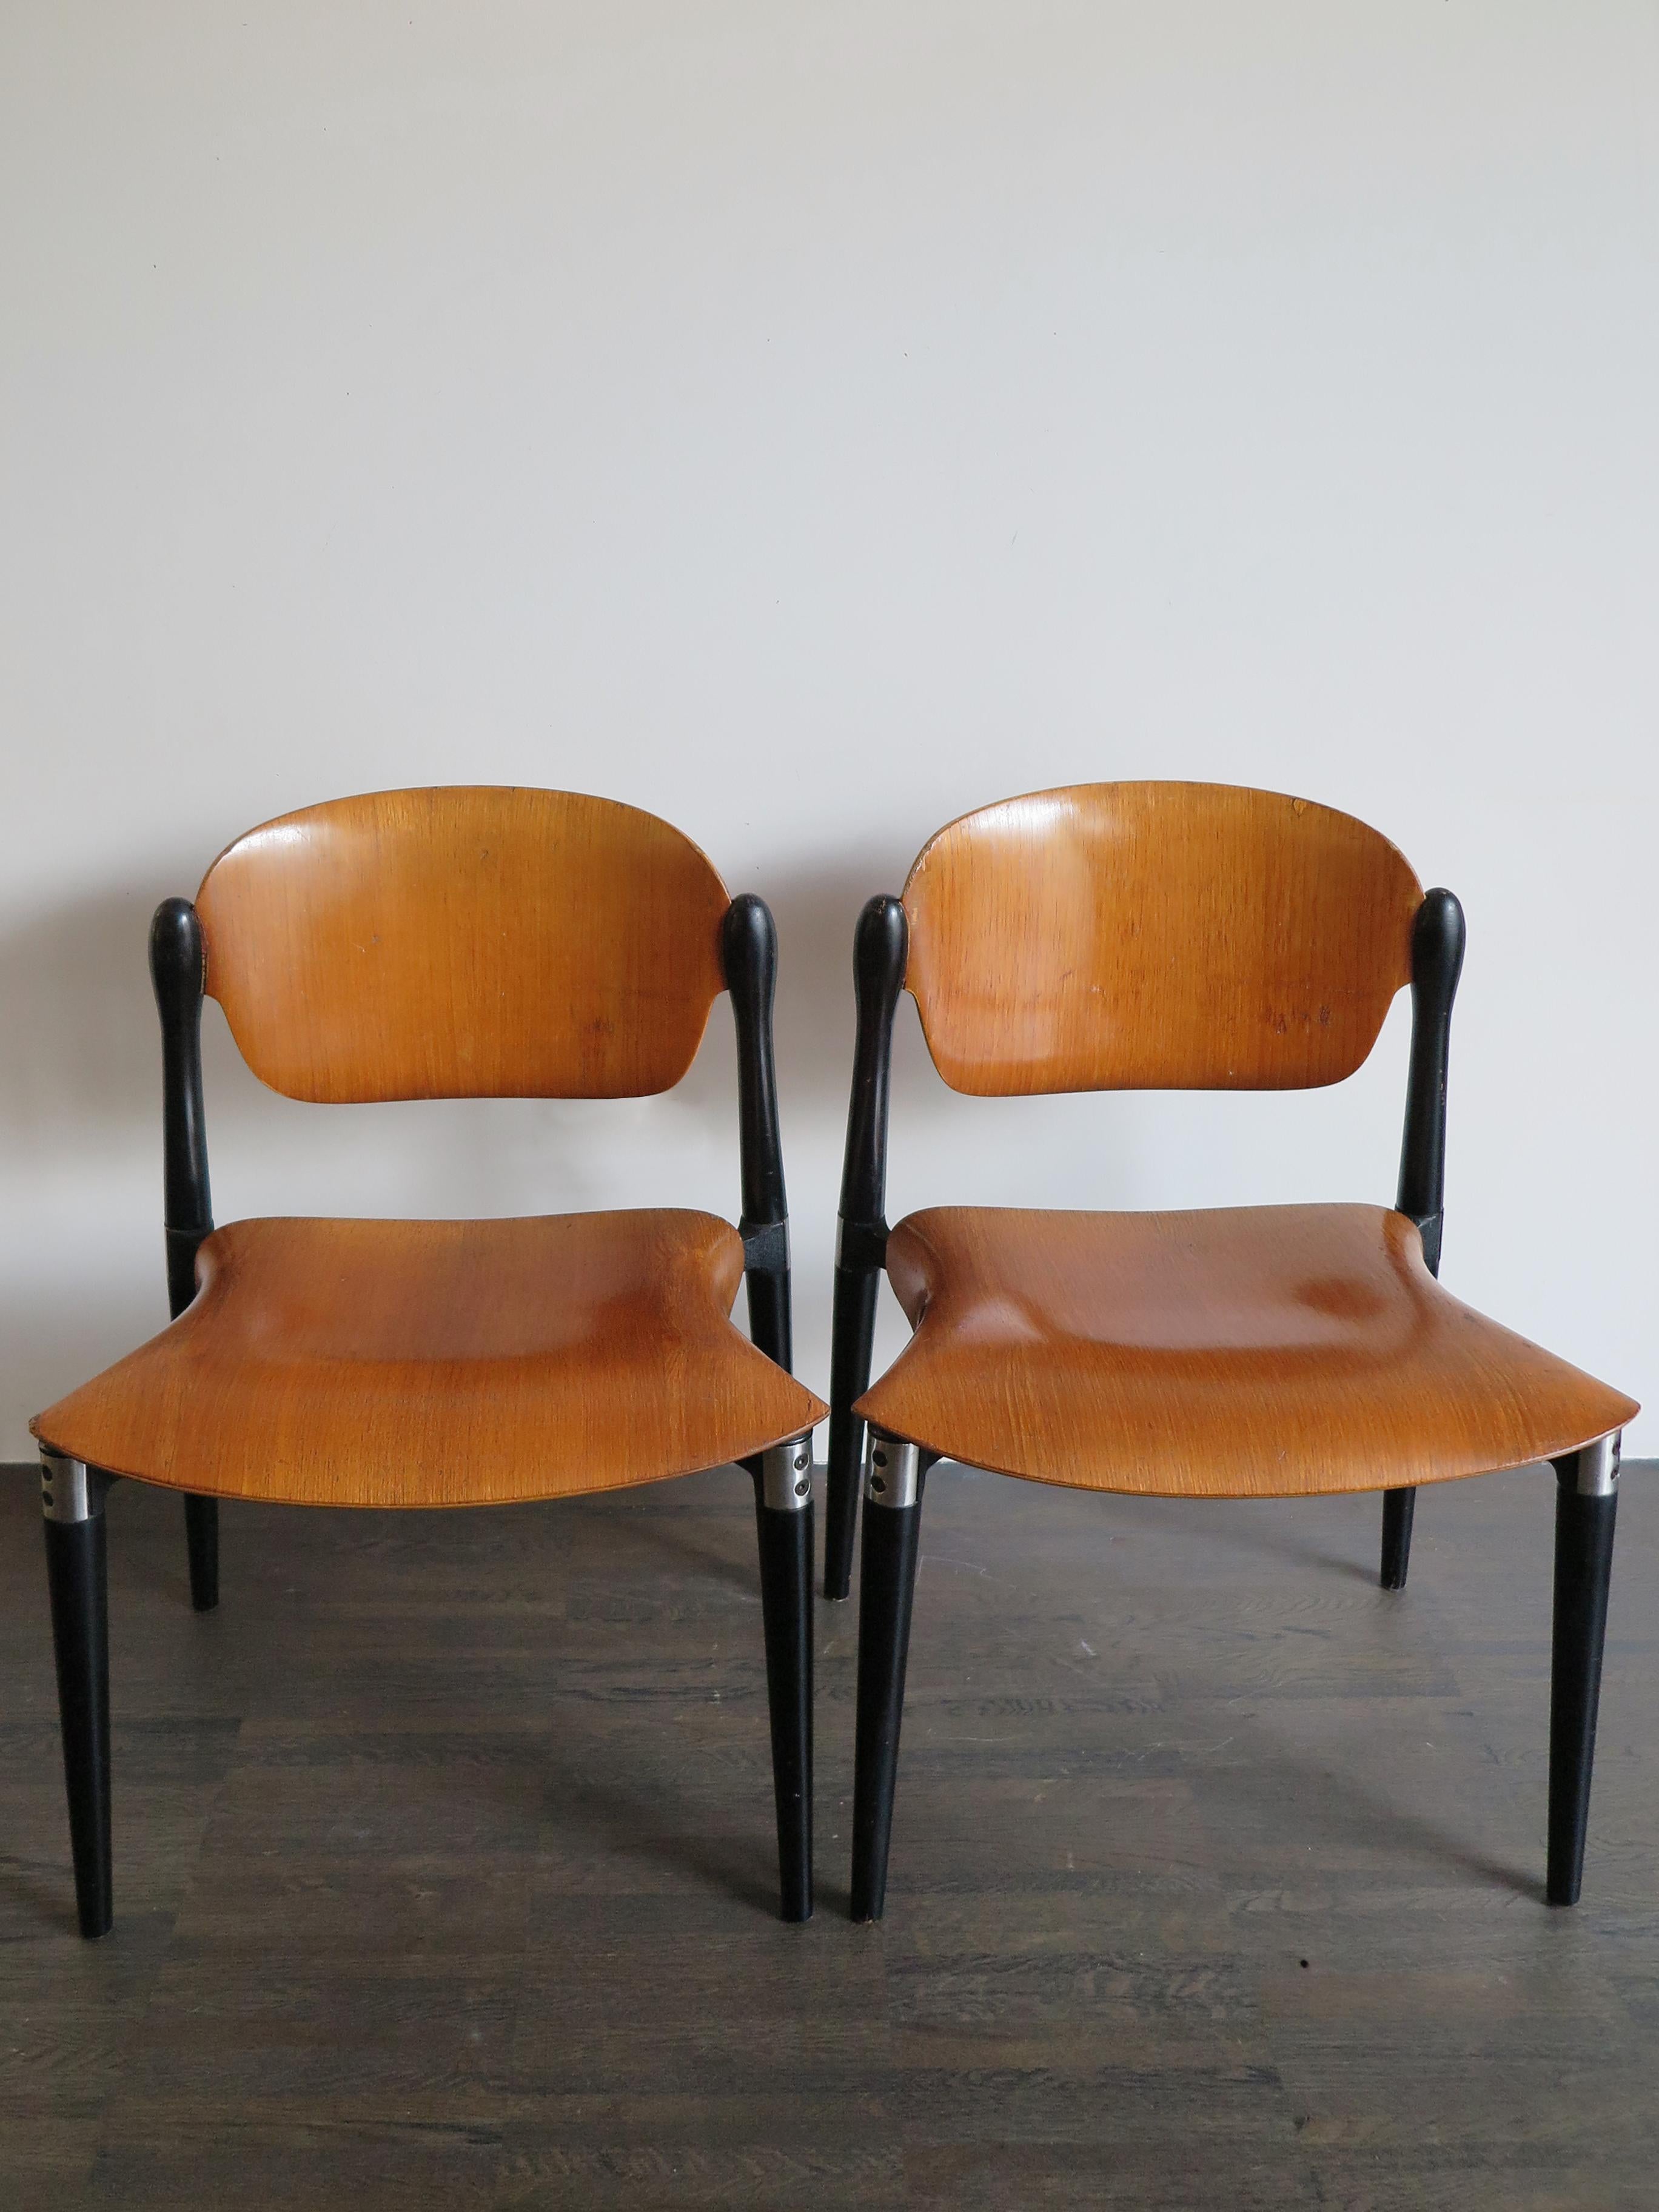 Mid-Century Modern Eugenio Gerli for Tecno Italian Curved Wood Dining Chairs Model “S832”, 1962